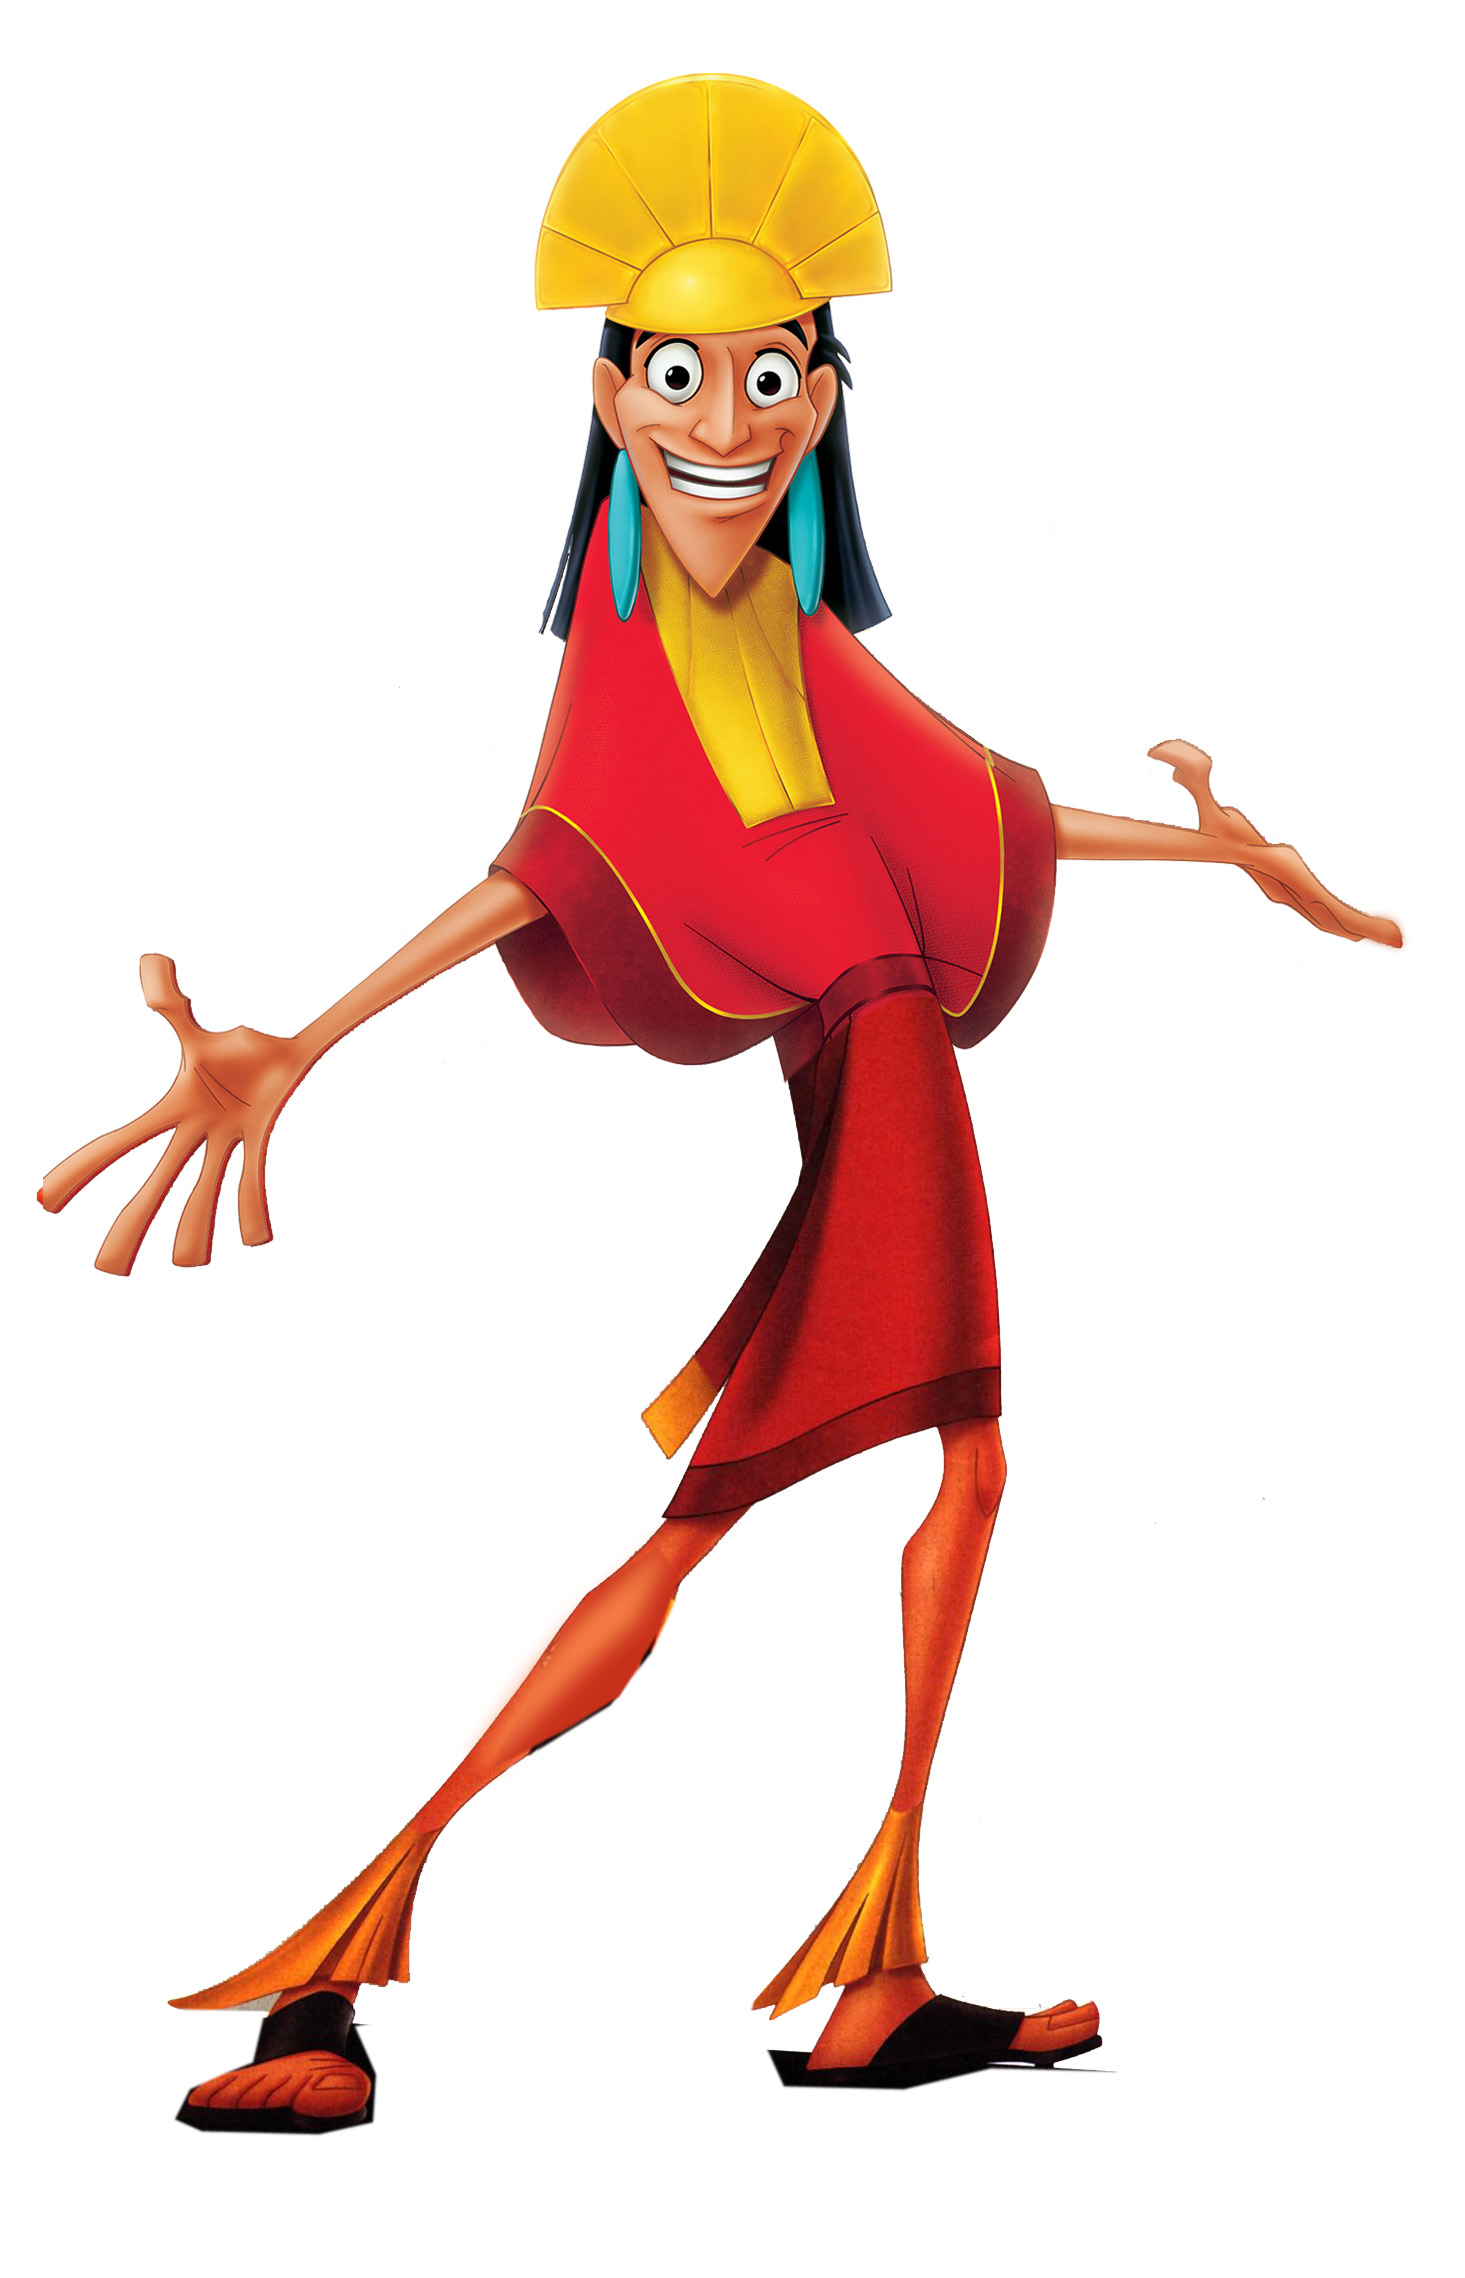 The-Emperors-New-Groove-59bff3fa.jpg